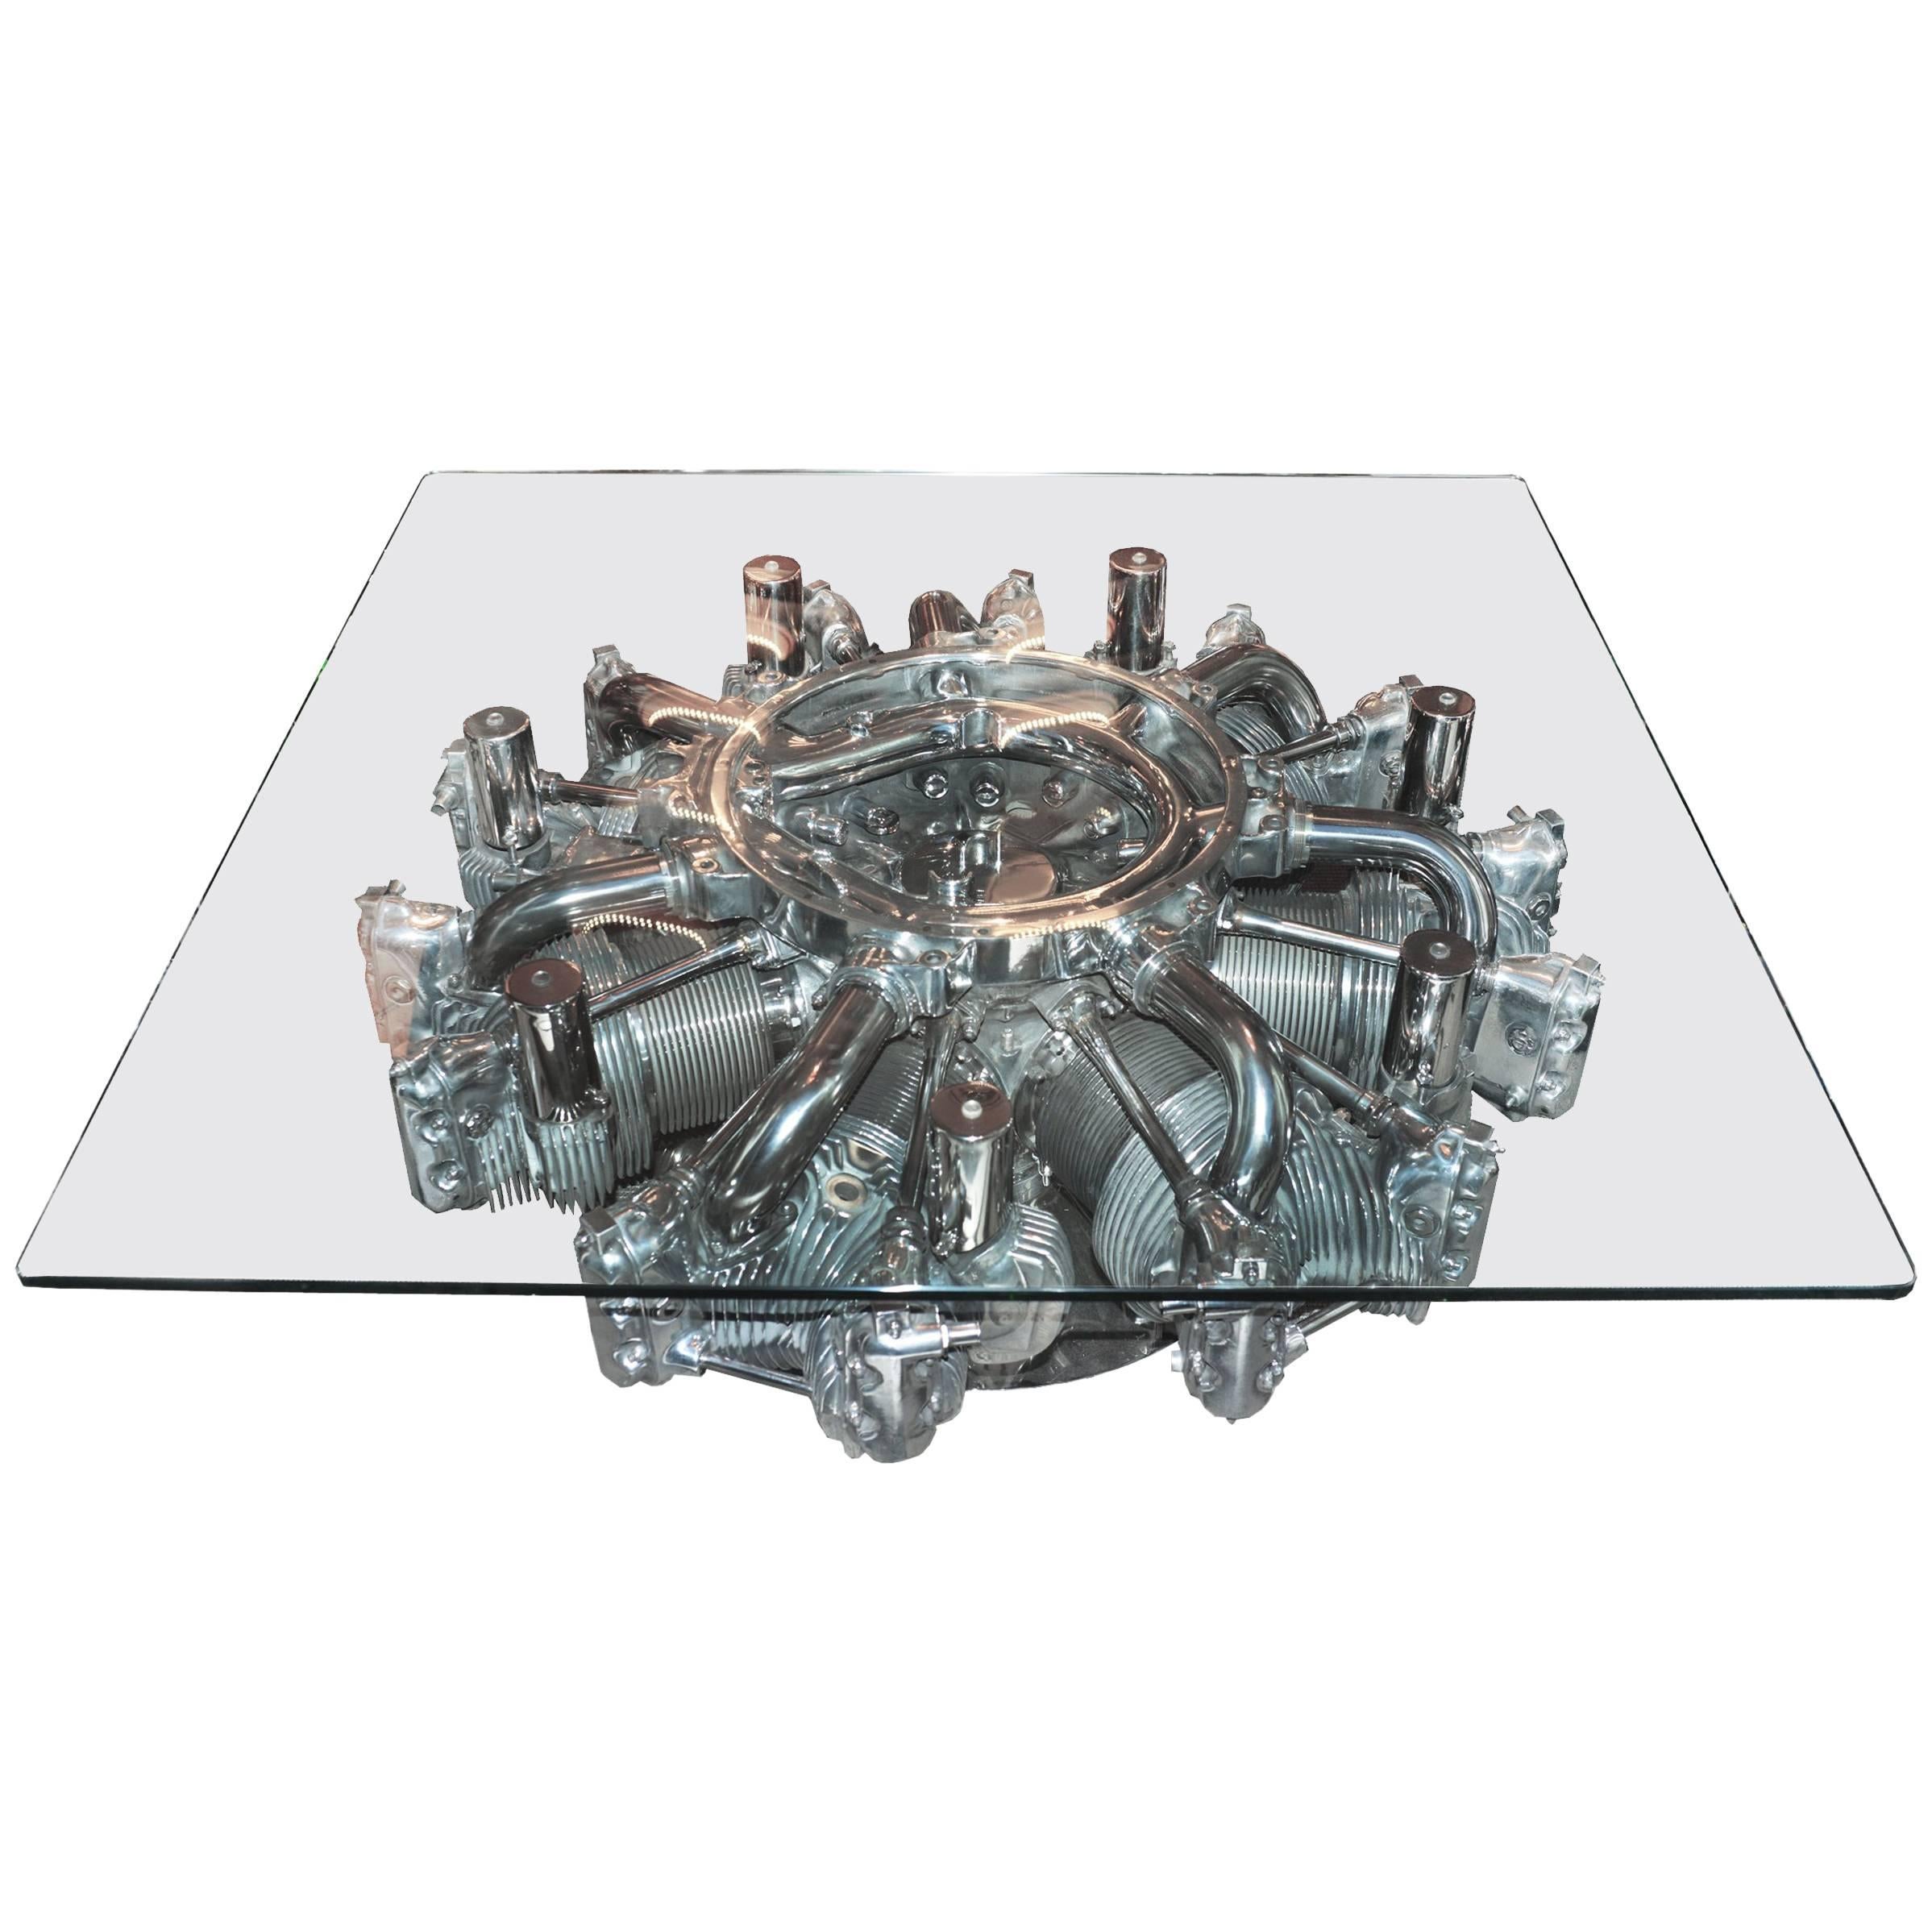 Continental R-670 Engine Coffee Table from Fairchild PT-23 Aircraft For Sale